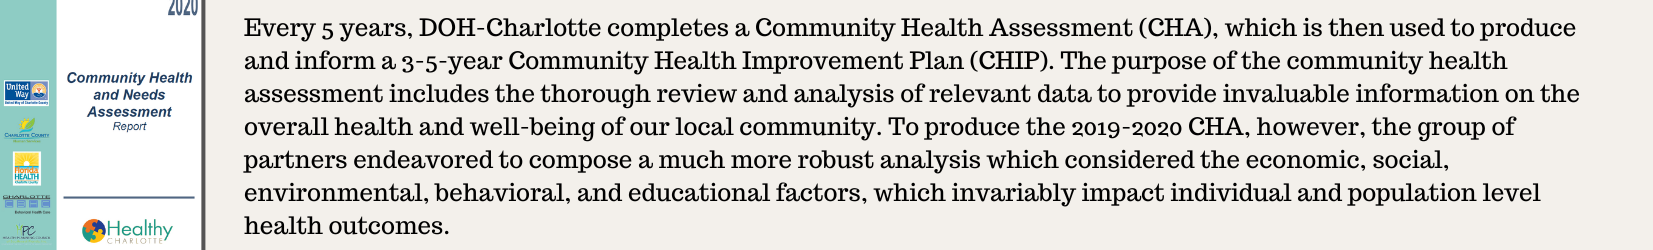 Community Health and Needs Assessment